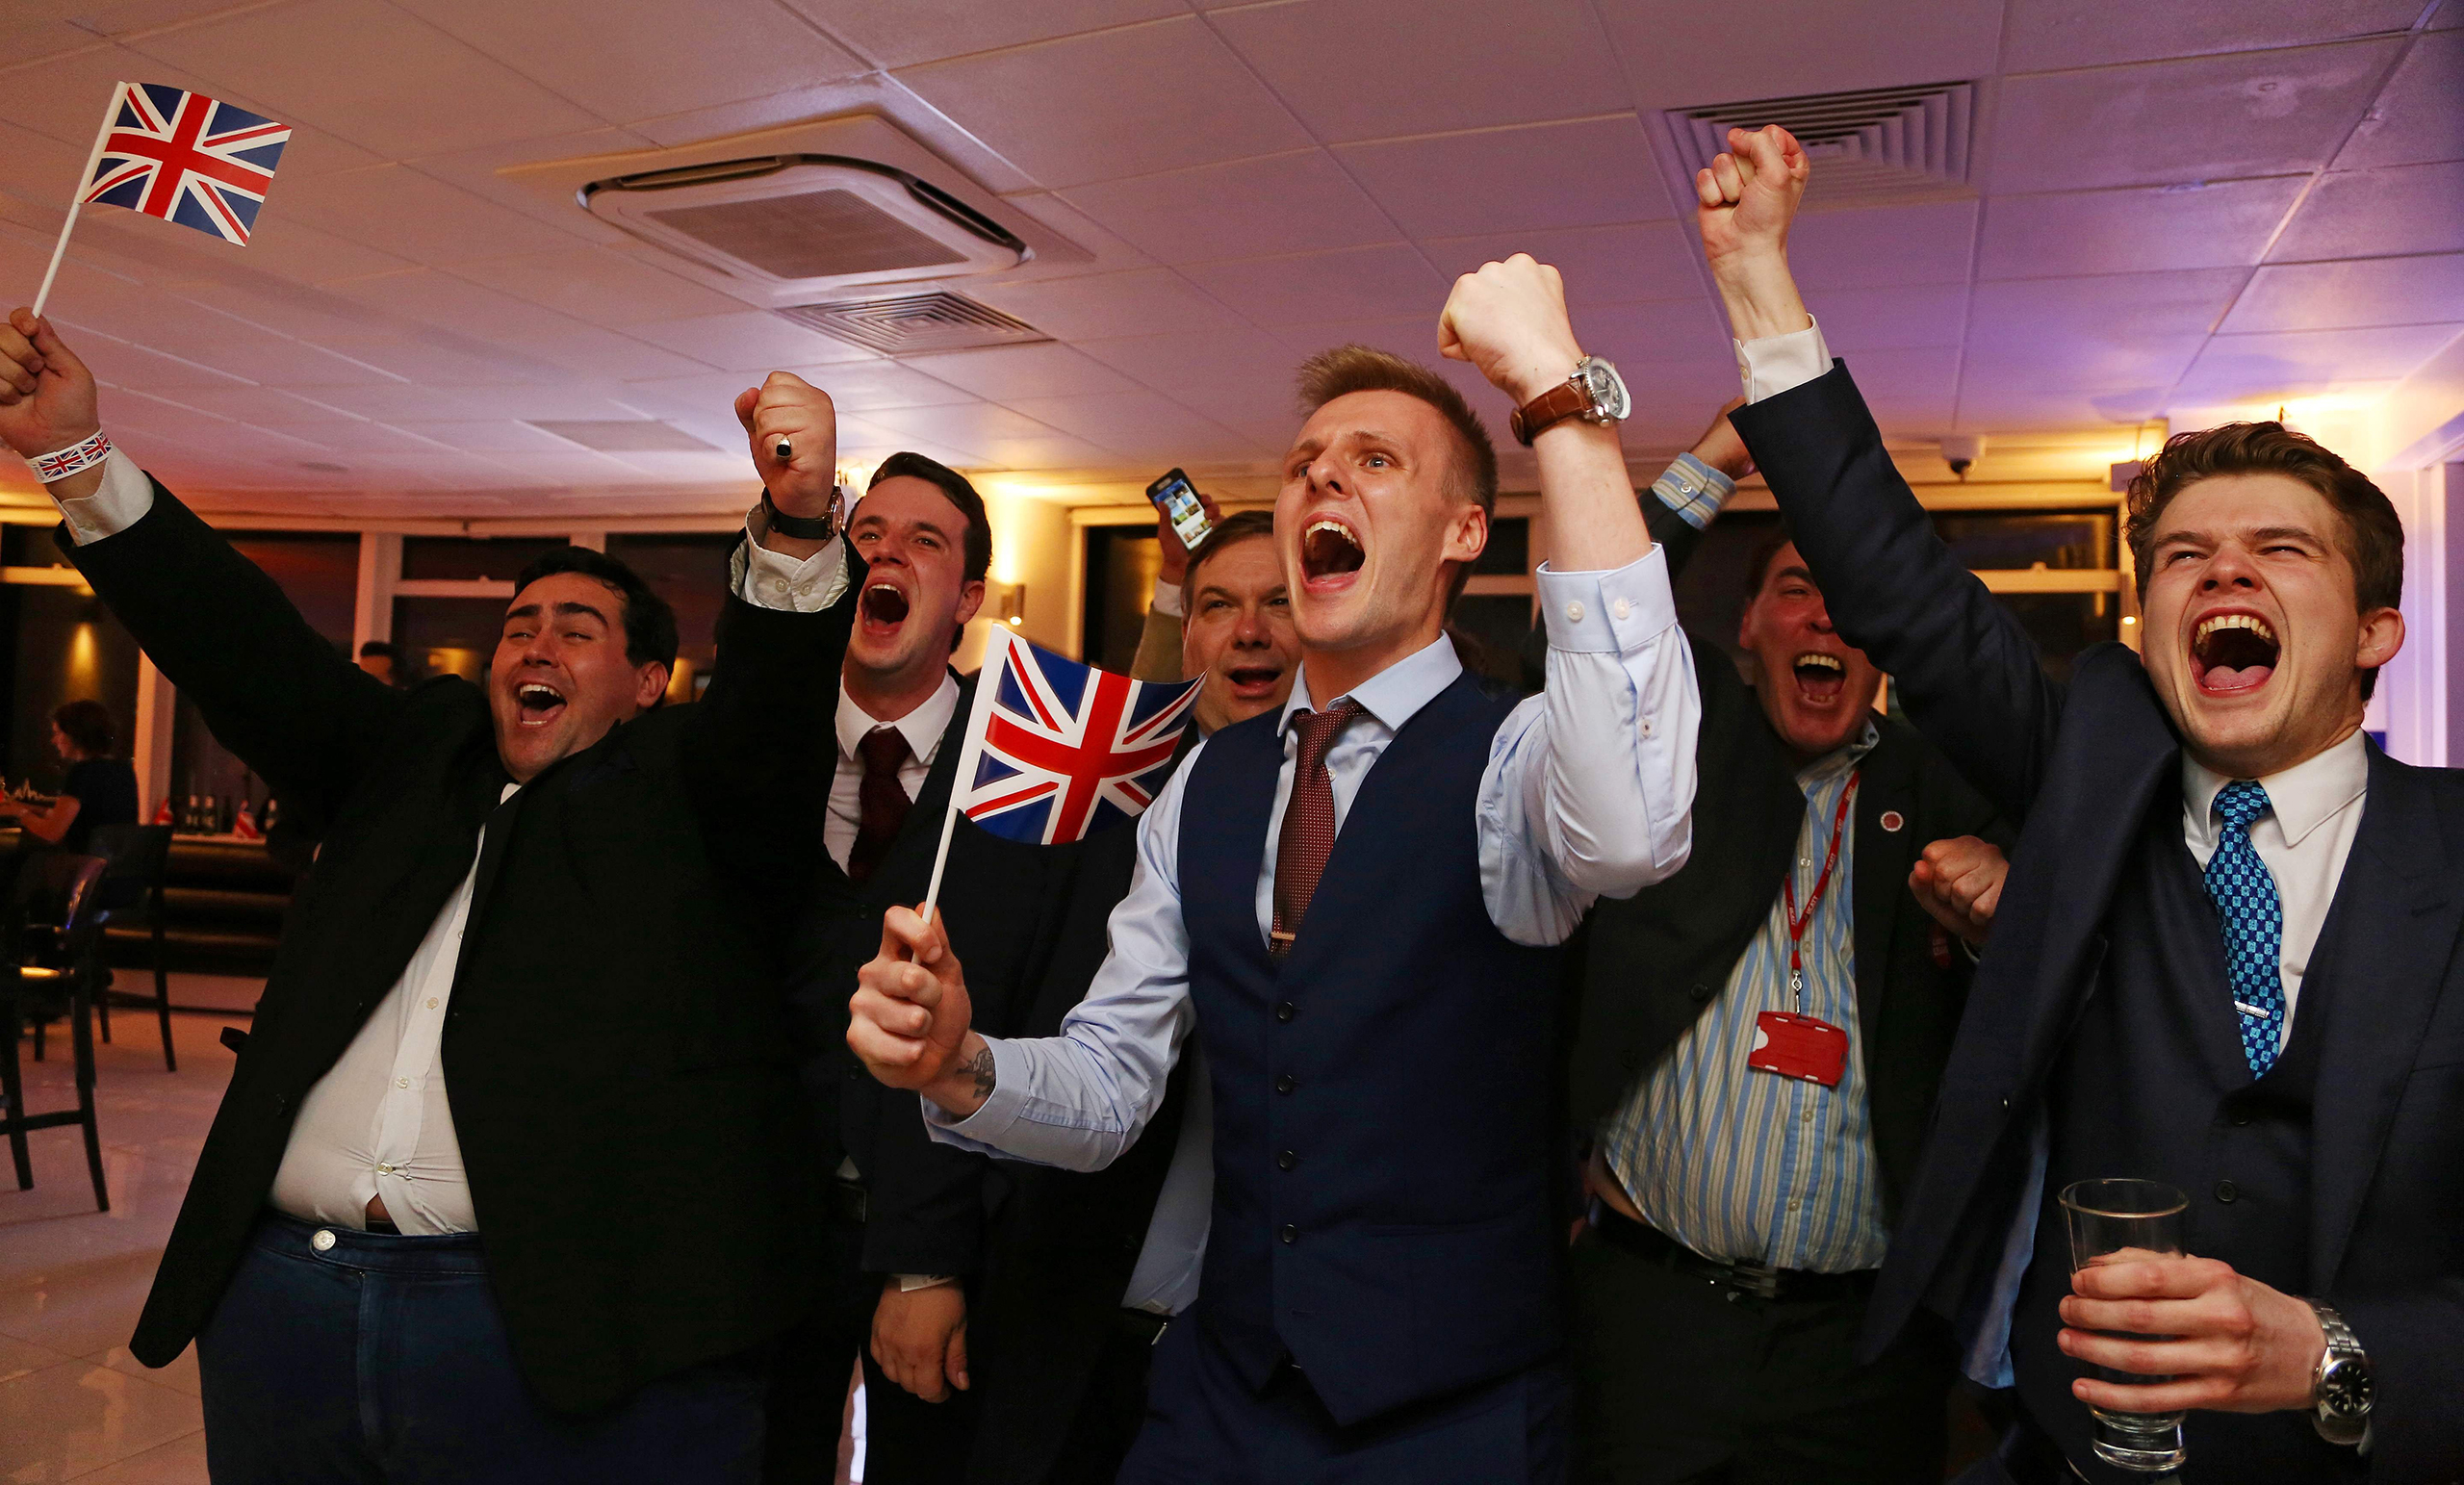 Vote Leave supporters cheer as the results come in at a referendum party at Millbank Tower in central London early on June 24, 2016. (Geoff Caddick—AFP/Getty Images)